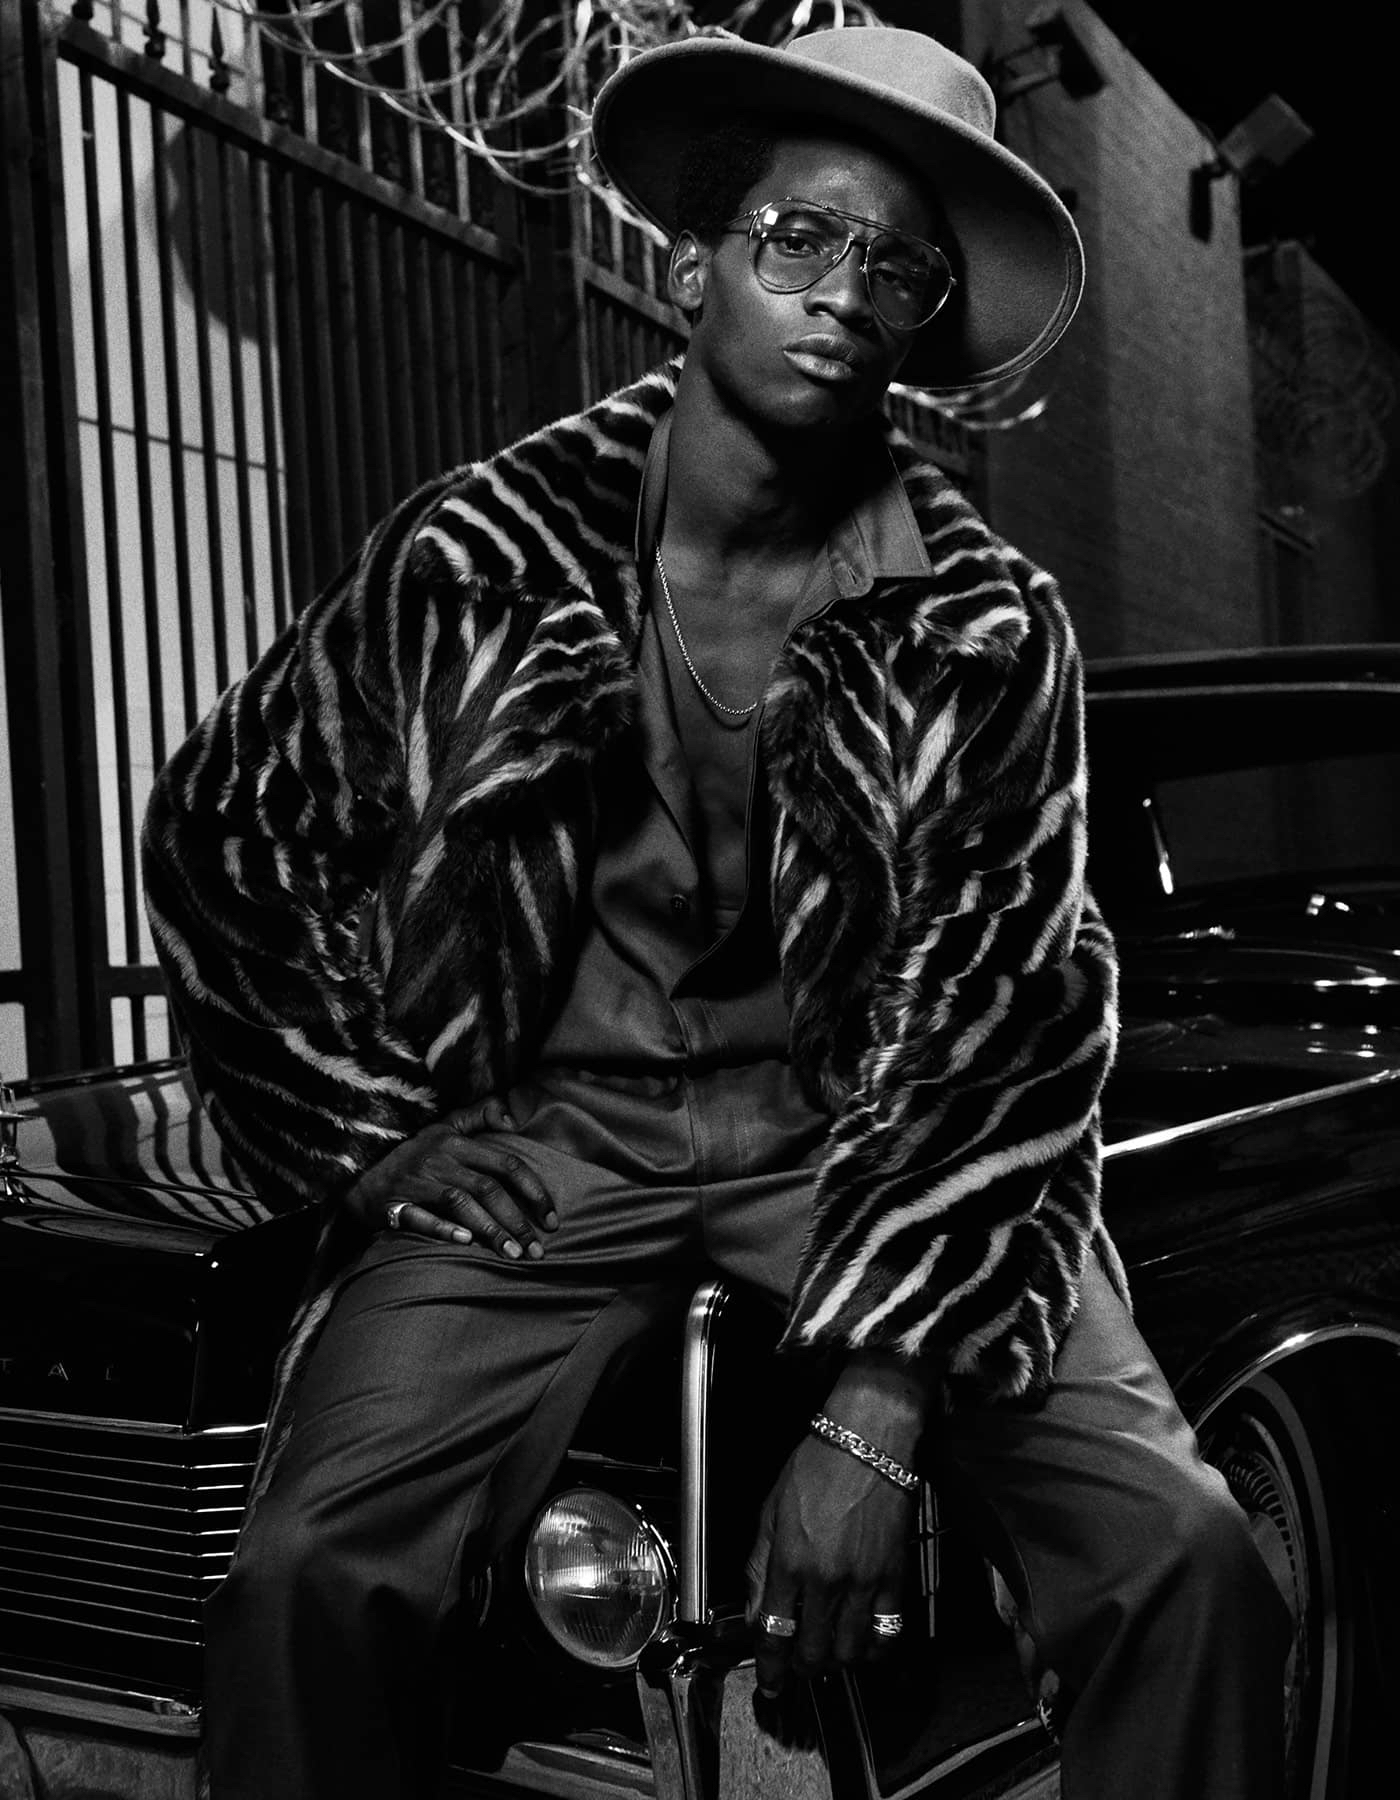 marie-claire-september-2017-04-adonis-bosso-by-francois-nars.jpeg